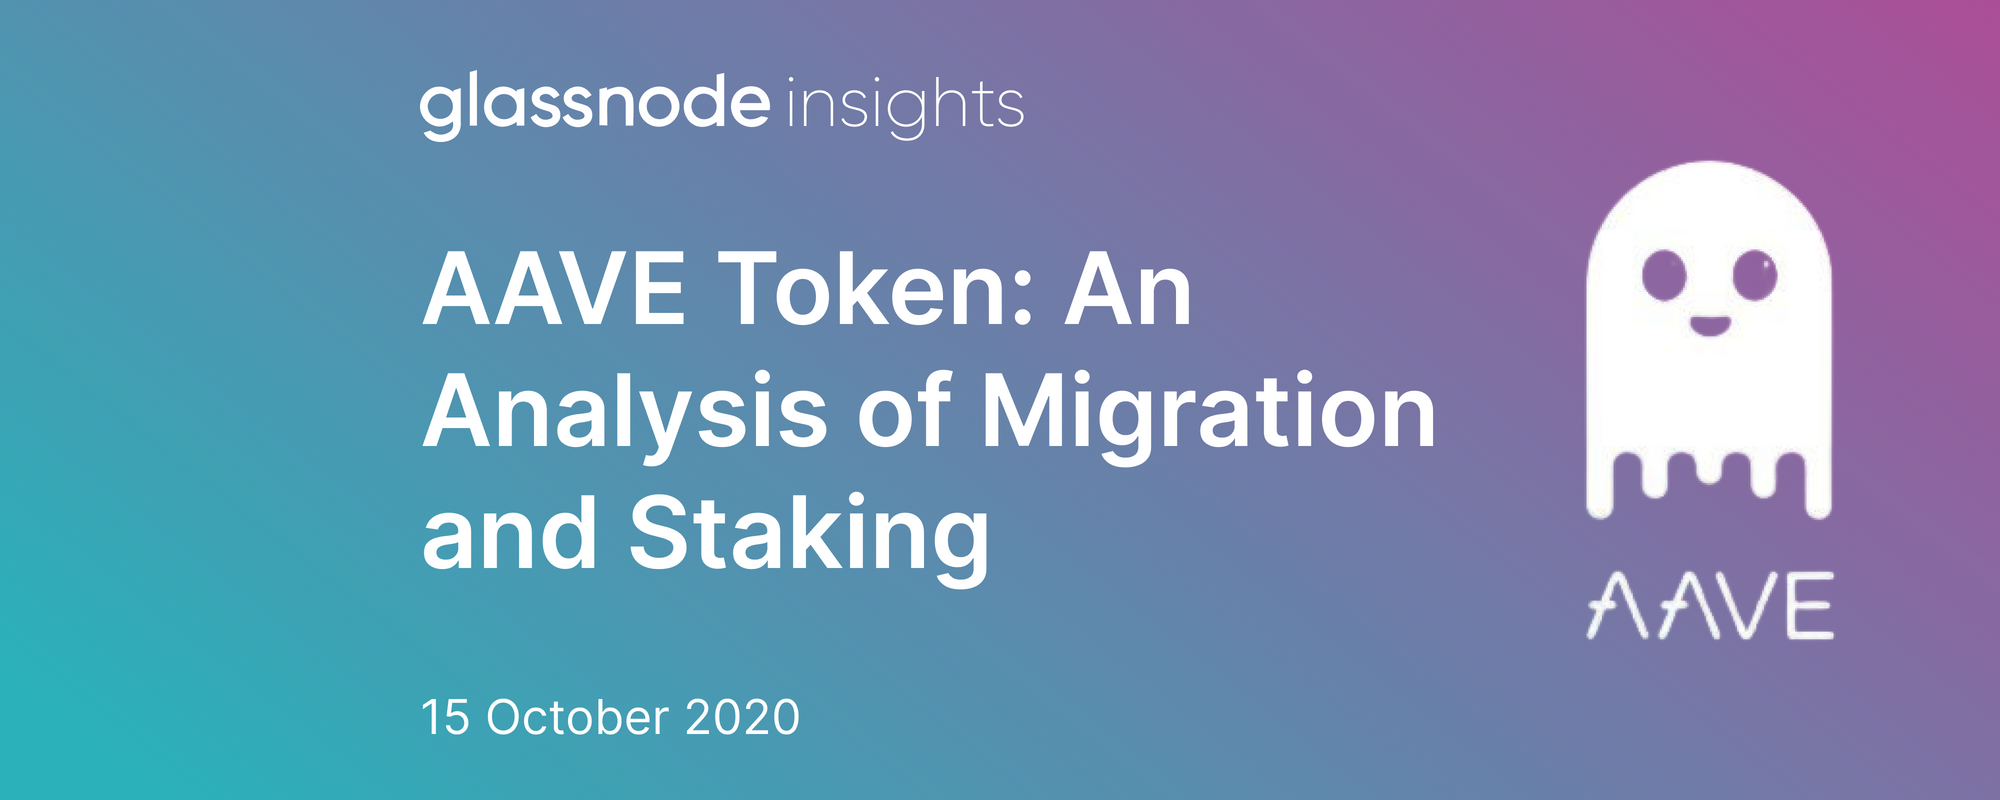 AAVE Token: An Analysis of Migration and Staking